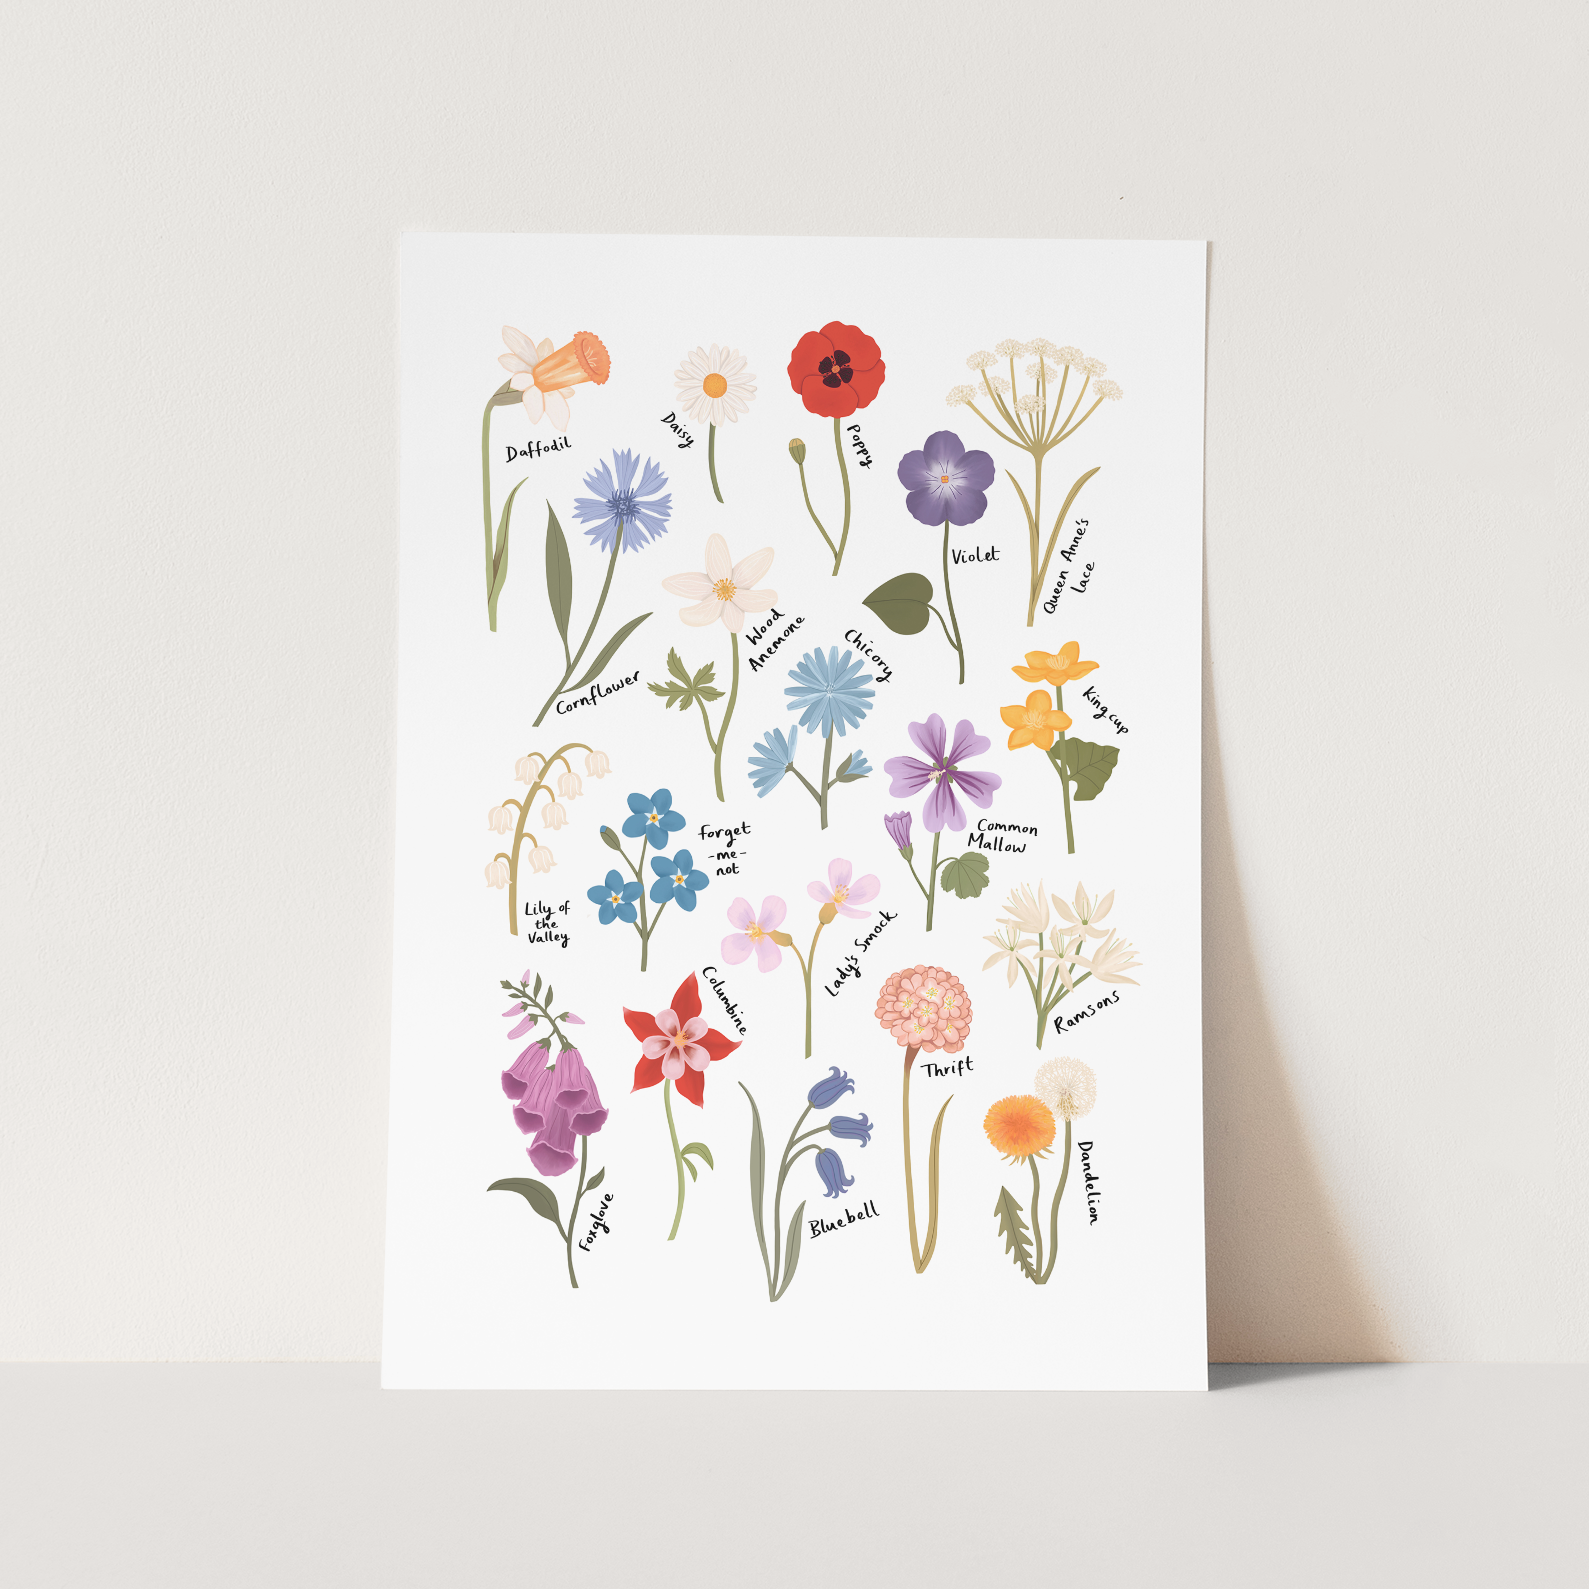 Wildflowers Art Print by Kid of the Village (6 Sizes Available)